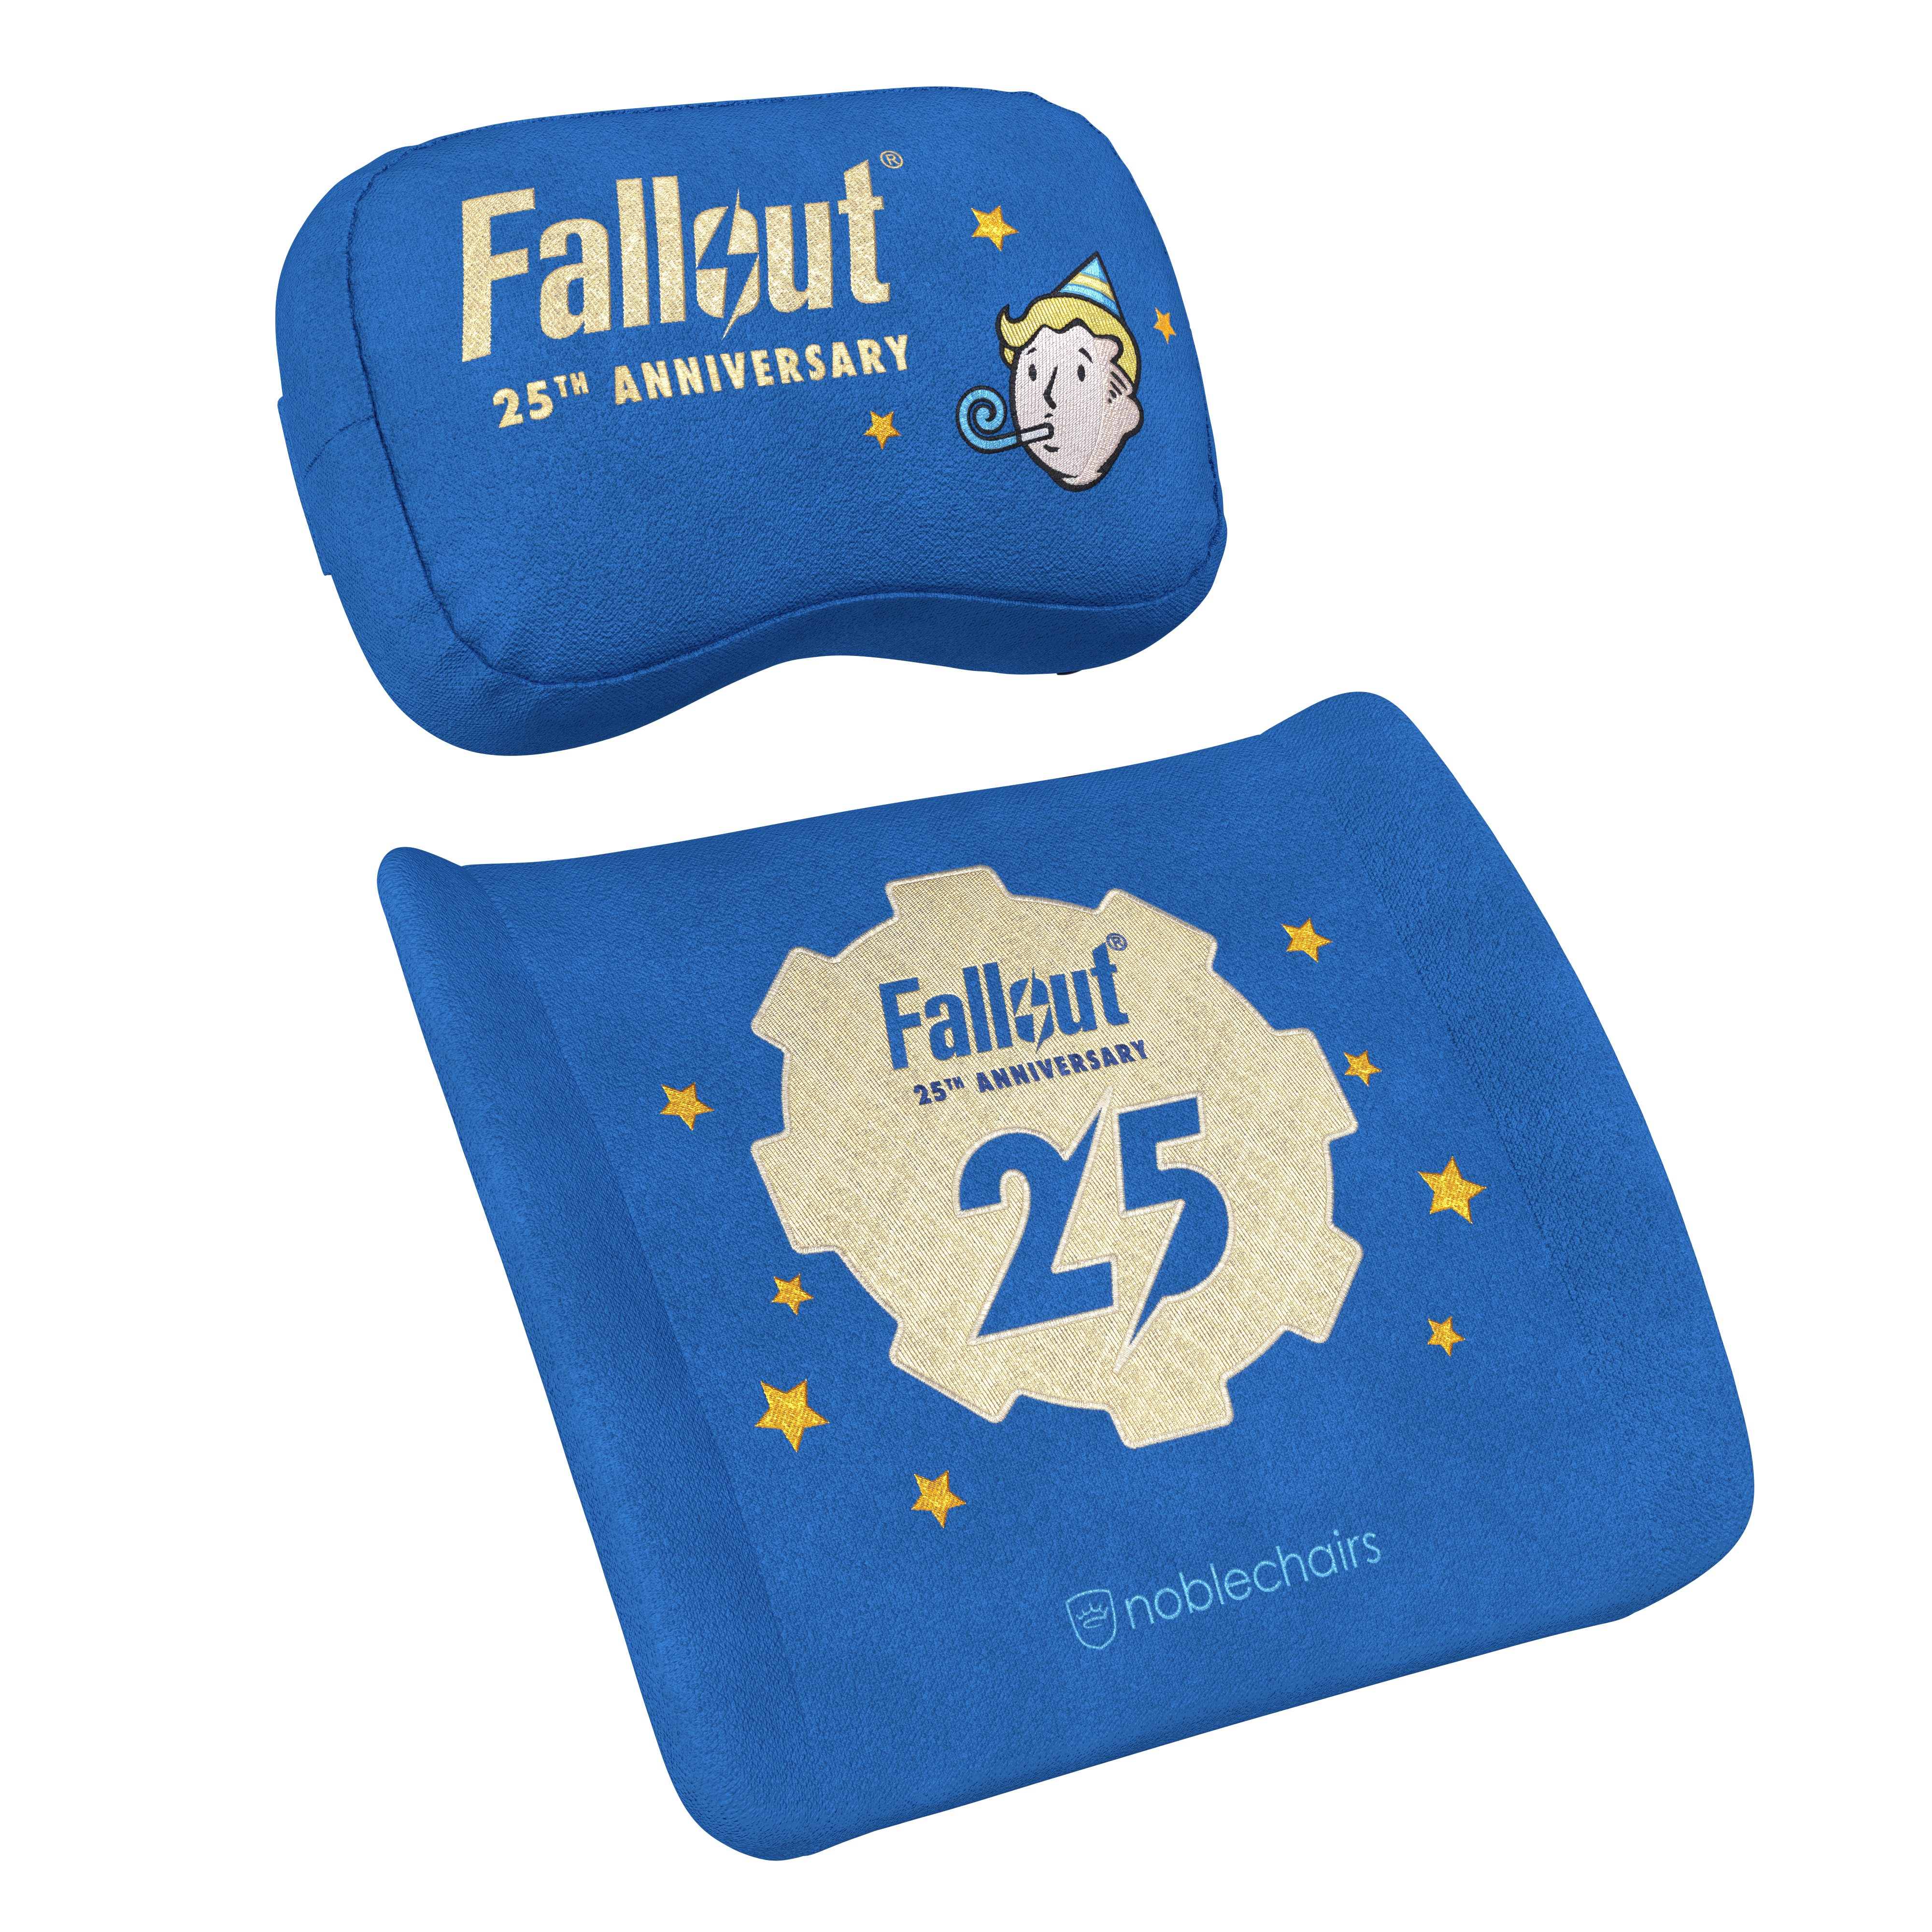 noblechairs - noblechairs Memory Foam Pillow Fallout 25th Anniversary Edition